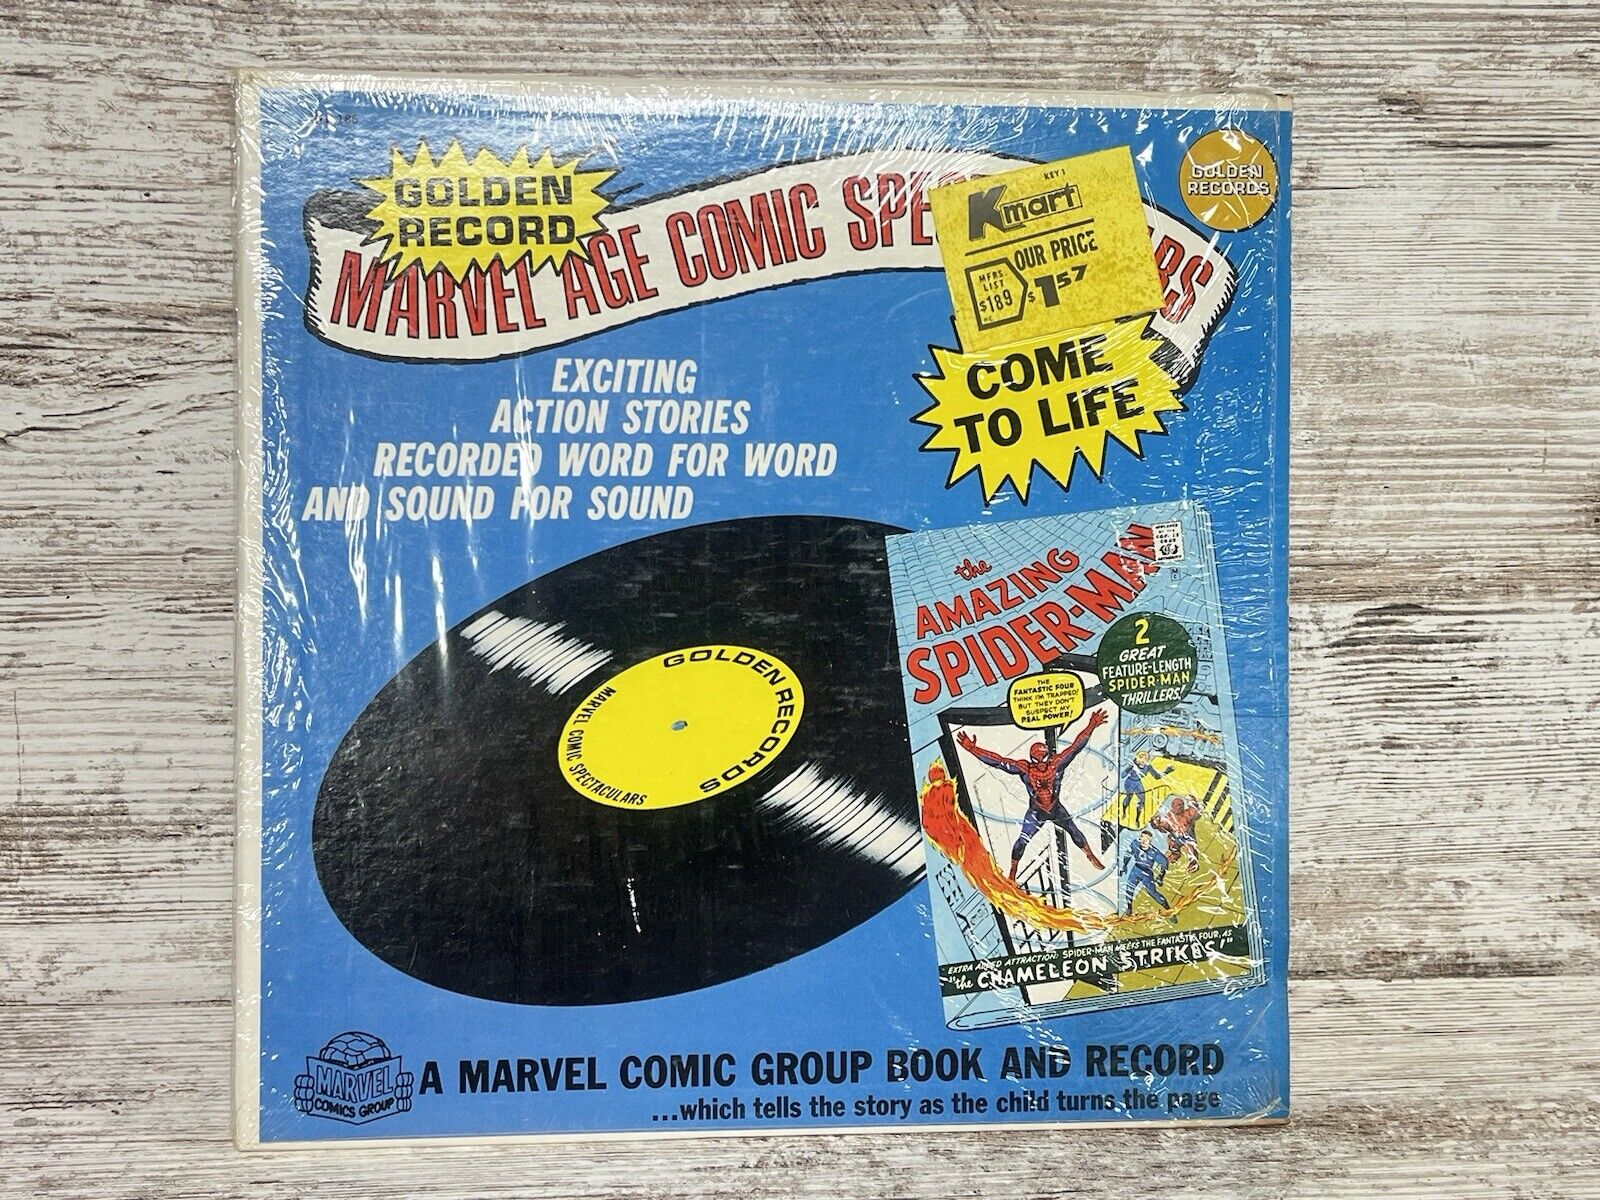 Golden Record Marvel Age Comic Spectacular AMAZING SPIDER-MAN SHRINK -No Comic